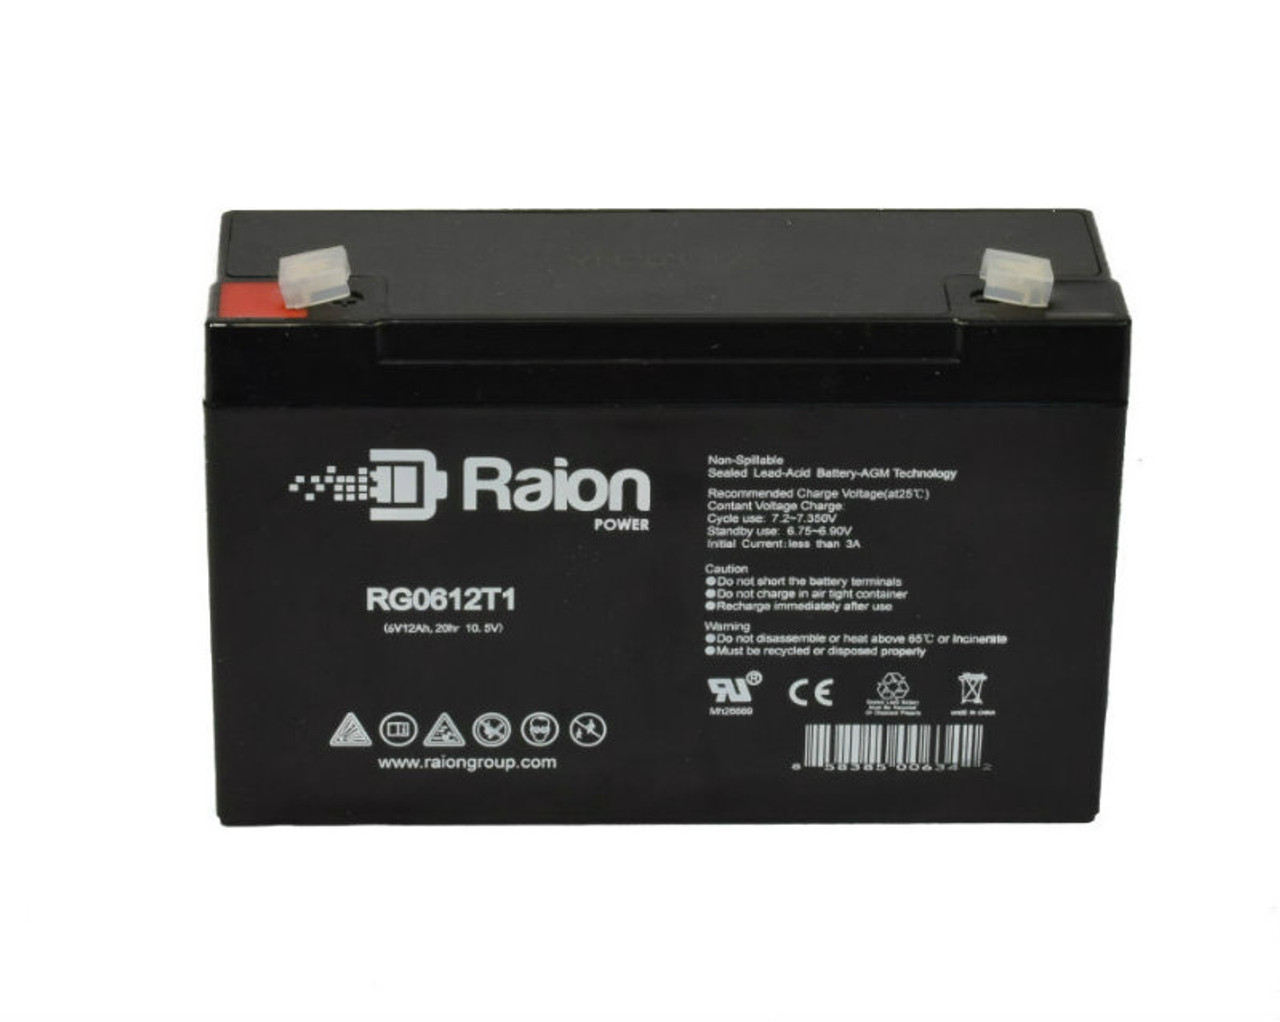 Raion Power RG06120T1 Replacement Battery Cartridge for Sola Series 3000 2200